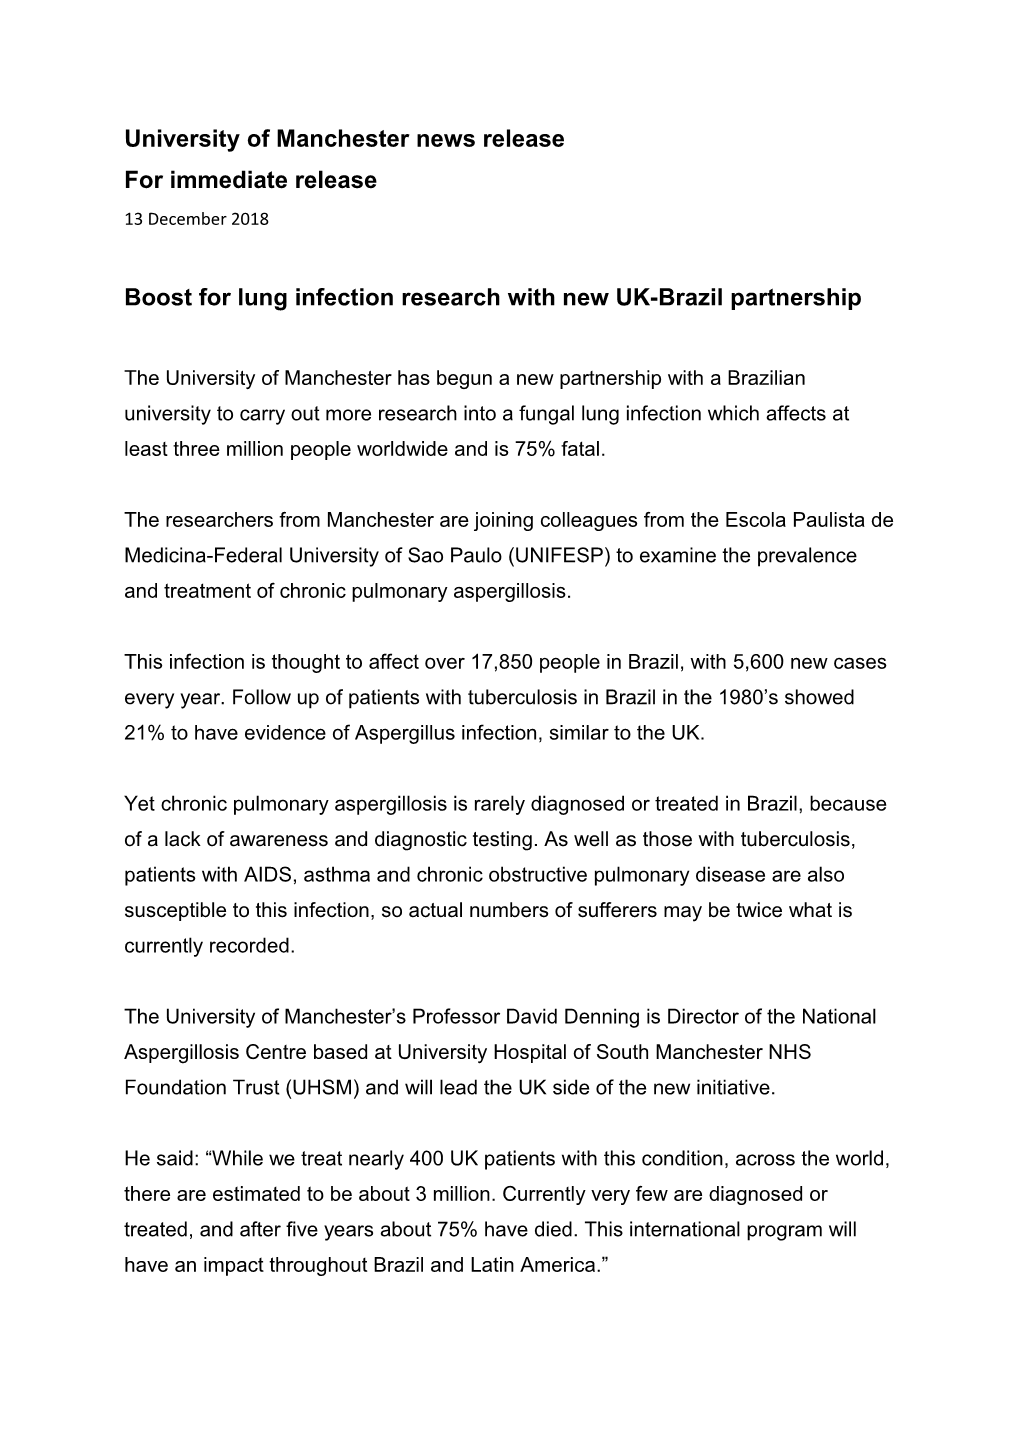 University of Manchester News Release